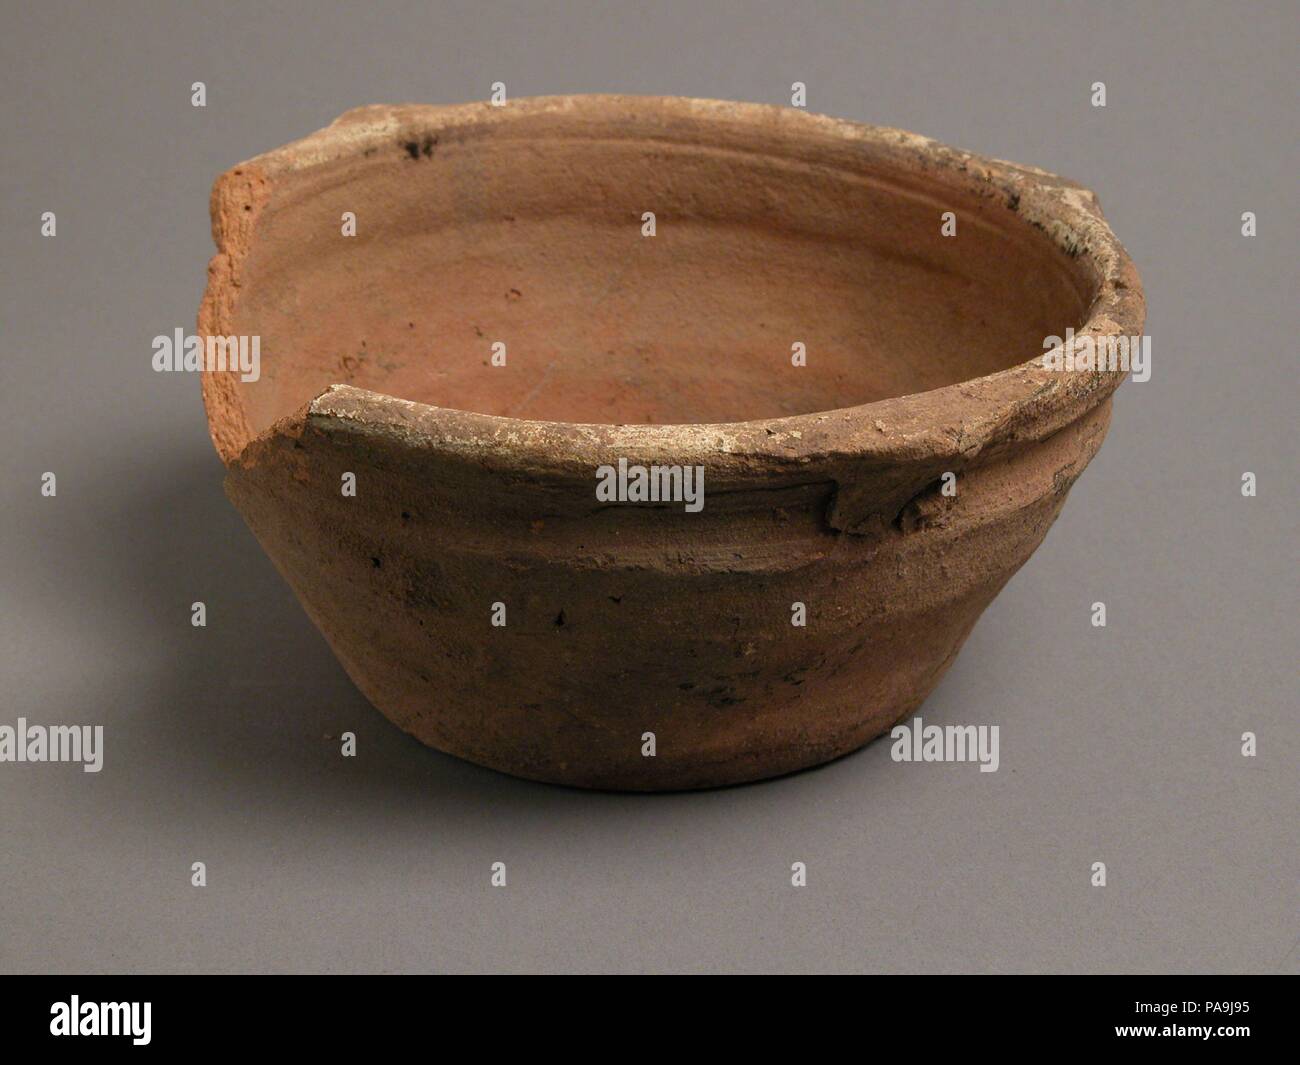 Bowl. Culture: Coptic. Dimensions: Overall: 2 13/16 x 6 9/16 in. (7.2 x 16.7 cm). Date: 4th-7th century. Museum: Metropolitan Museum of Art, New York, USA. Stock Photo